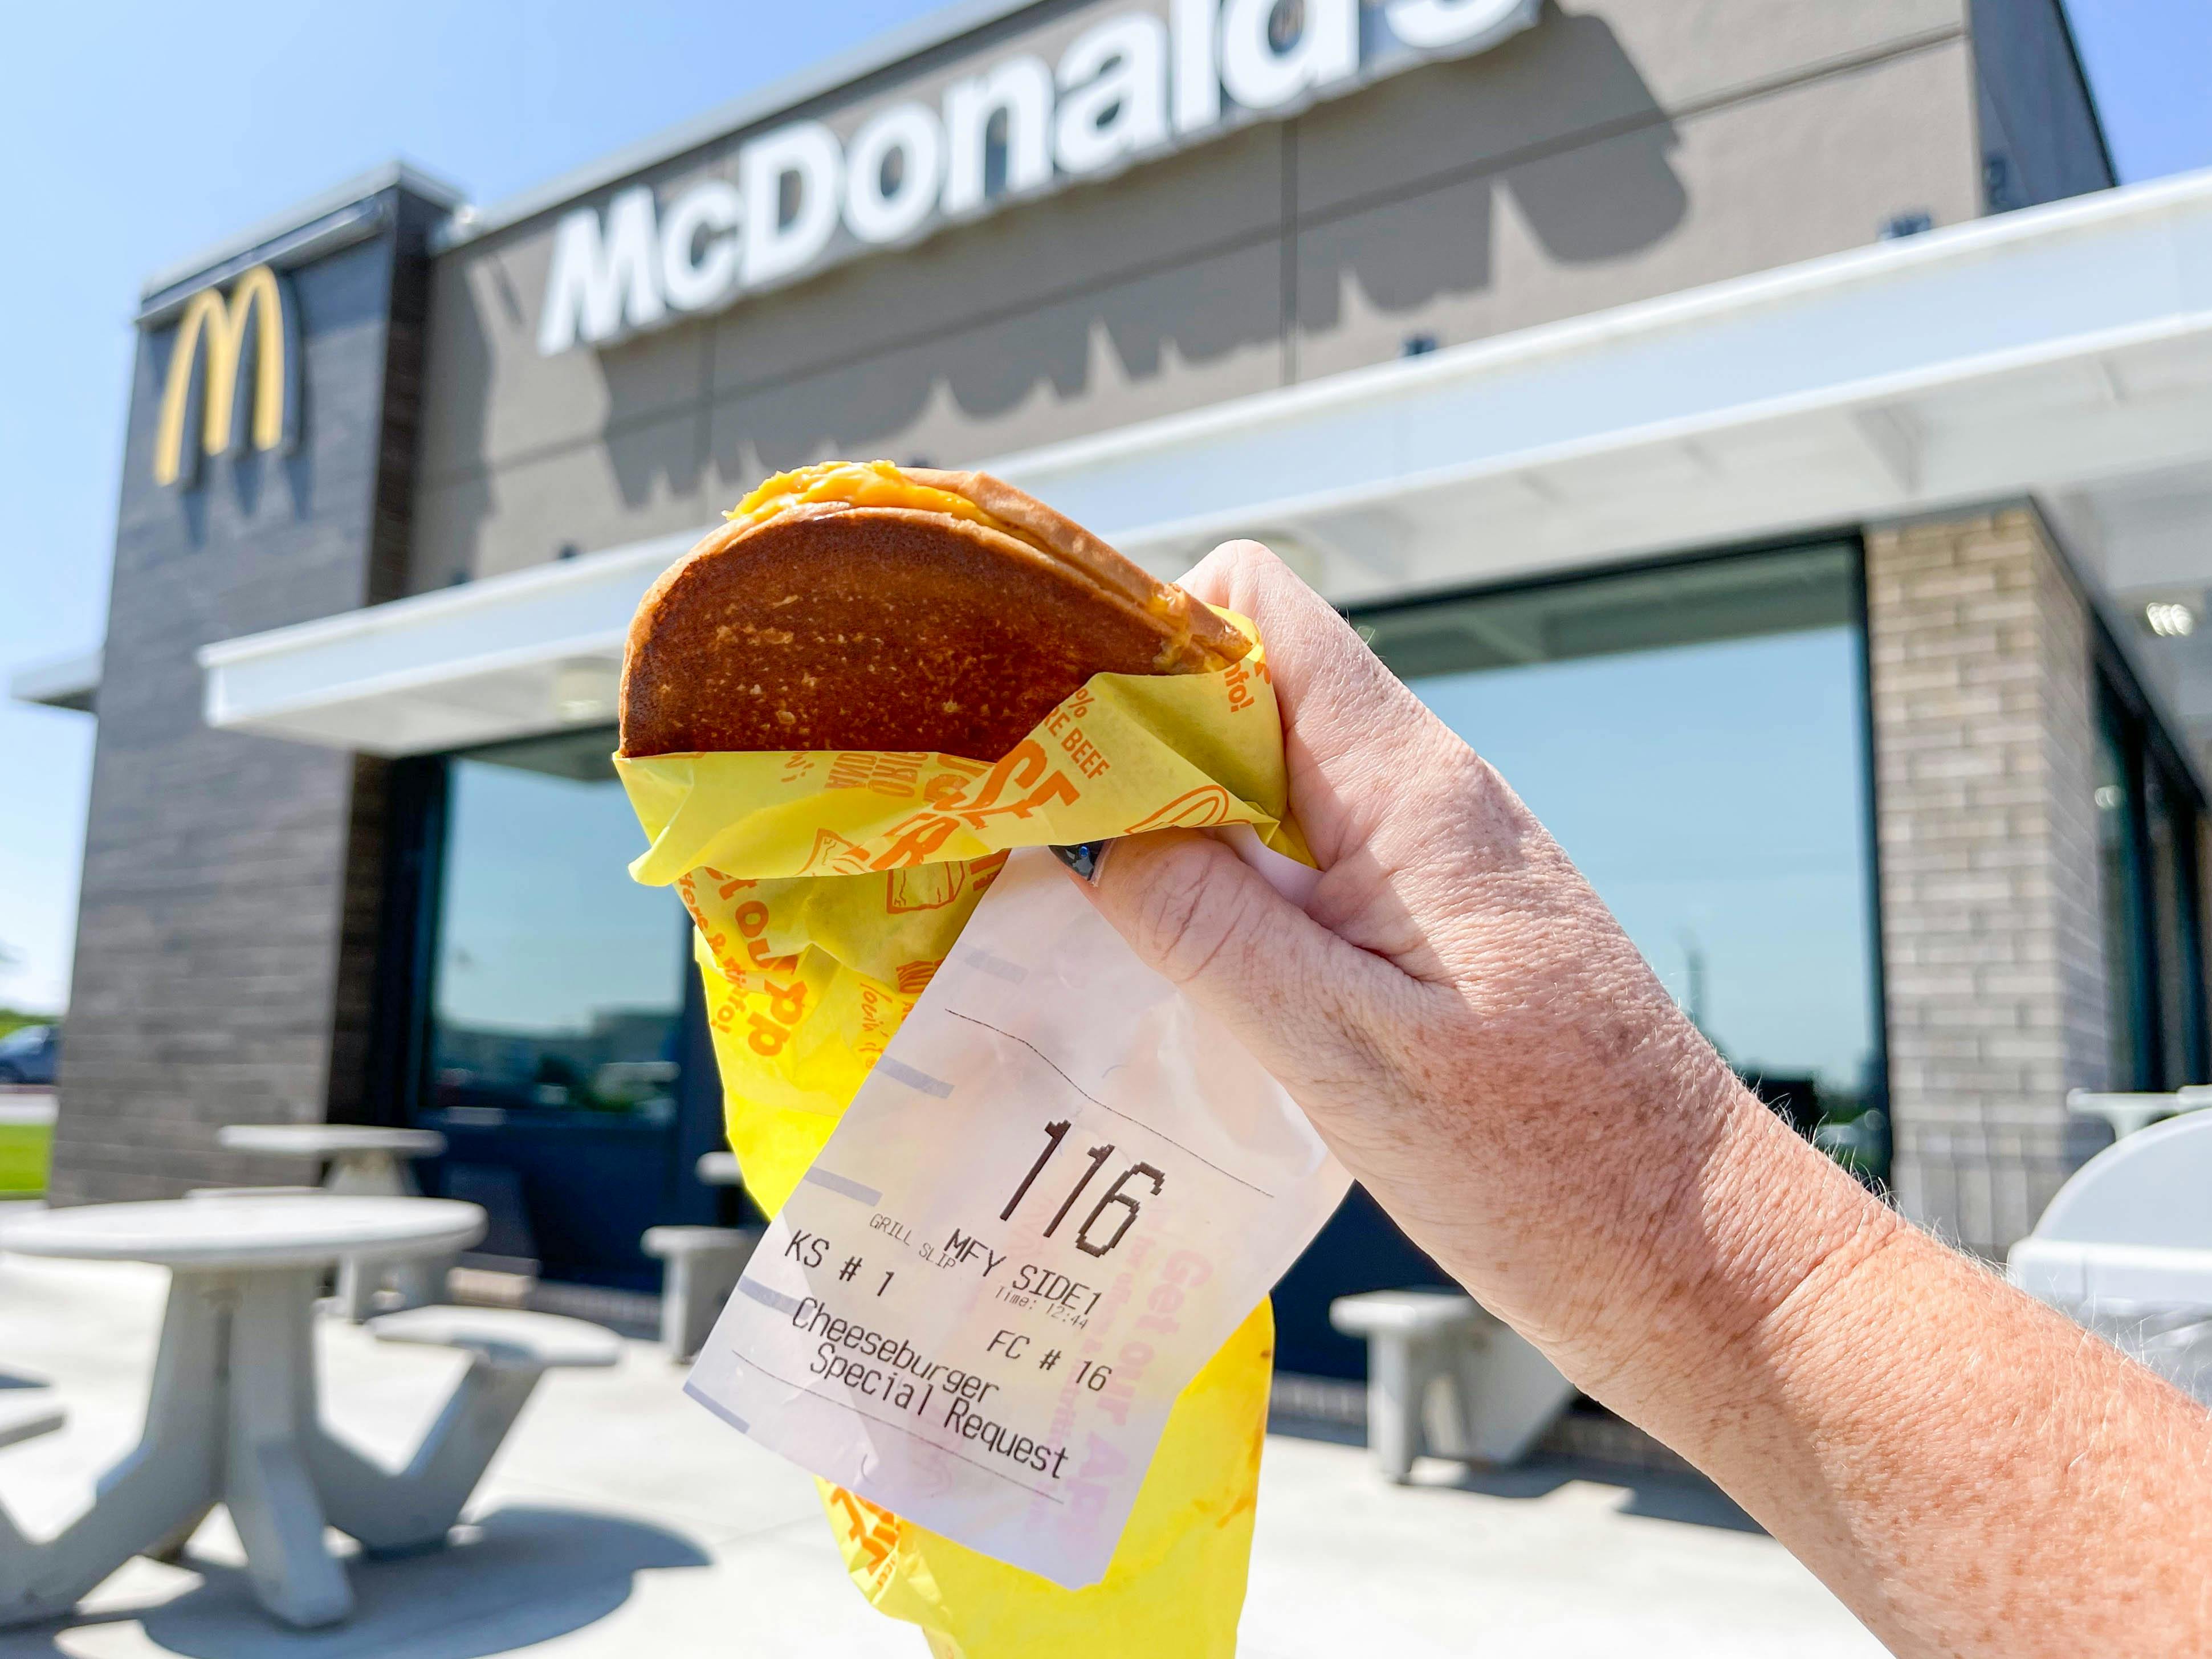 A person's hand holding a specially requested McDonald's grilled cheese in front of a McDonald's storefront.